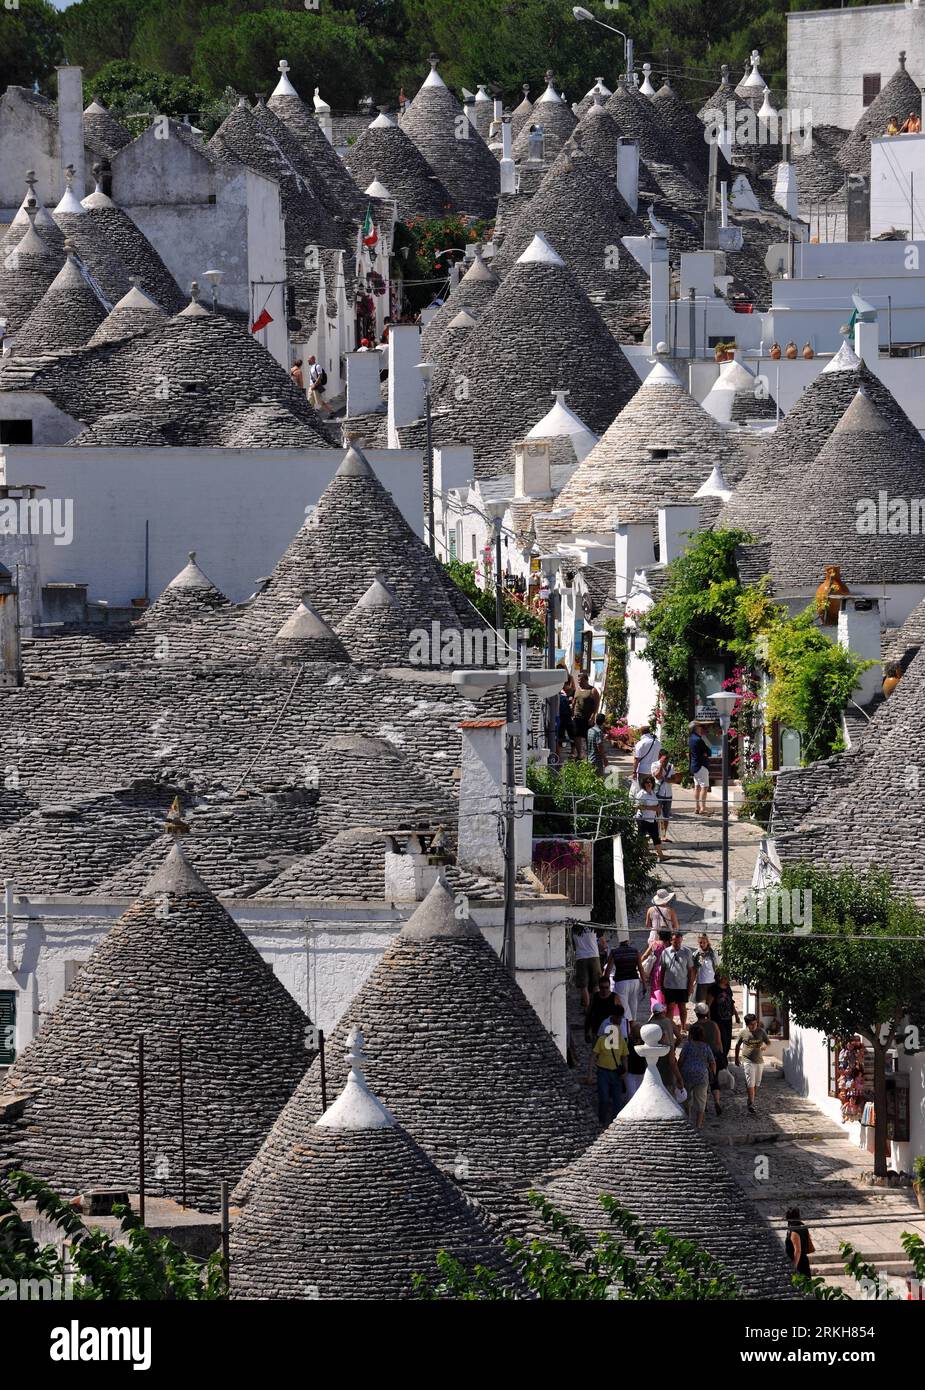 Bildnummer: 55711010  Datum: 10.08.2011  Copyright: imago/Xinhua (110812) -- ALBEROBELLO, Aug. 12, 2011 (Xinhua) -- Photo taken on Aug. 10, 2011 shows the Trulli in Alberobello, southern Italy. Alberobello, the city of drystone dwellings known as trulli, is an exceptional example of vernacular architecture. The trulli are made of roughly worked limestone boulders collected from neighbouring fields. Characteristically, they feature pyramidal, domed or conical roofs built up of corbelled limestone slabs. UNESCO inscribed the Trulli of Alberobello in the World Heritage List in 1996. (Xinhua/Wang Stock Photo